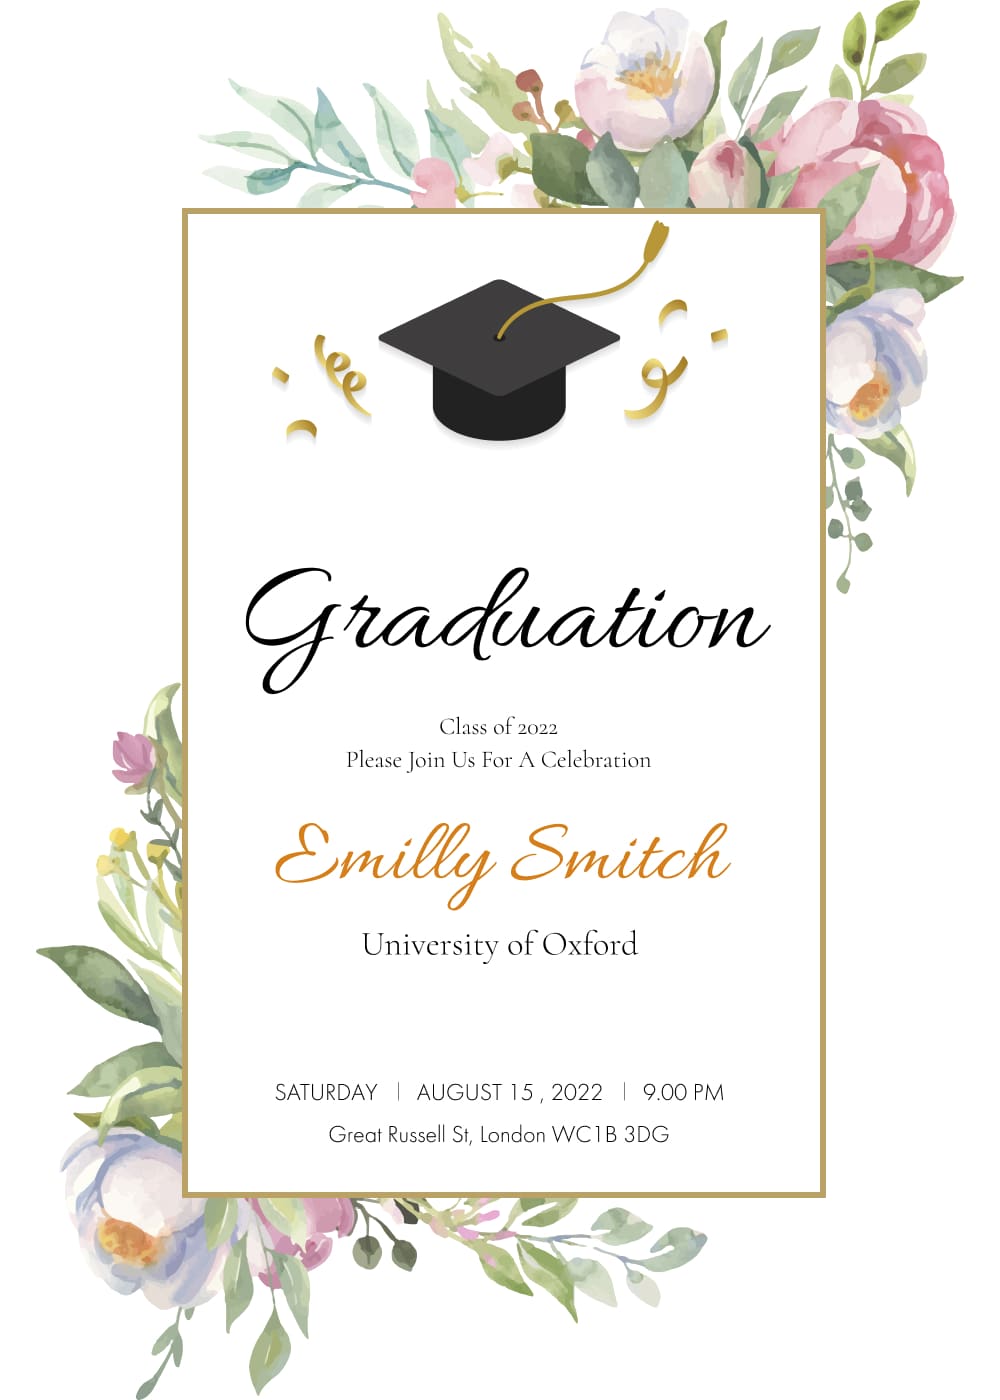 Use this template for invitations.